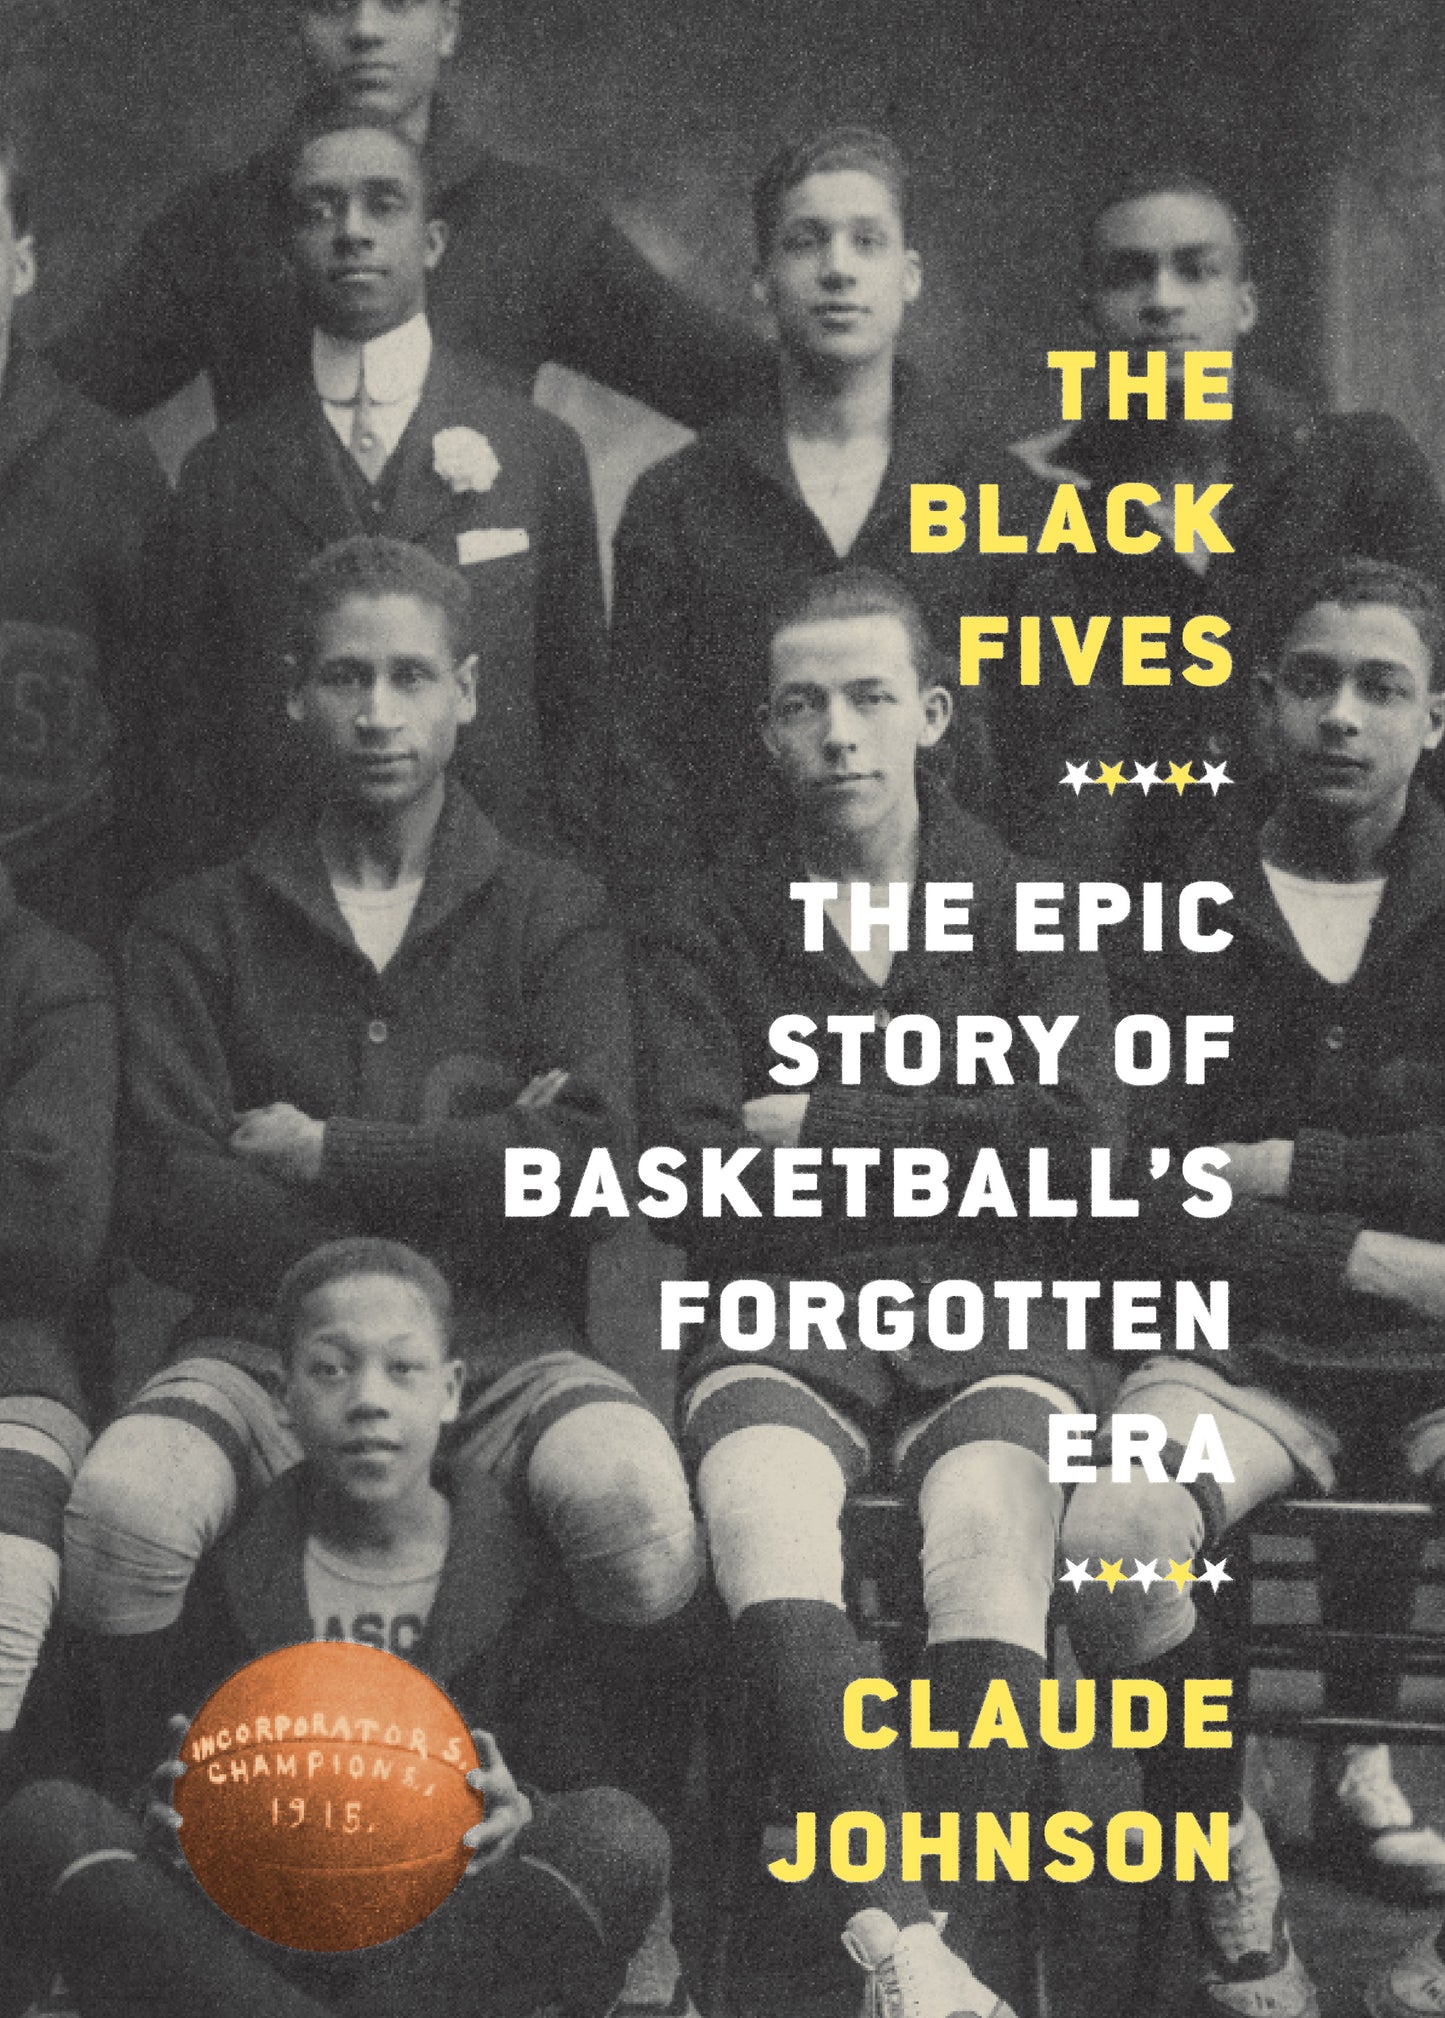 Image of the book cover for "THE BLACK FIVES: THE EPIC STORY OF BASKETBALL’S FORGOTTEN ERA" by Claude Johnson (Hardcover, Abrams Press)